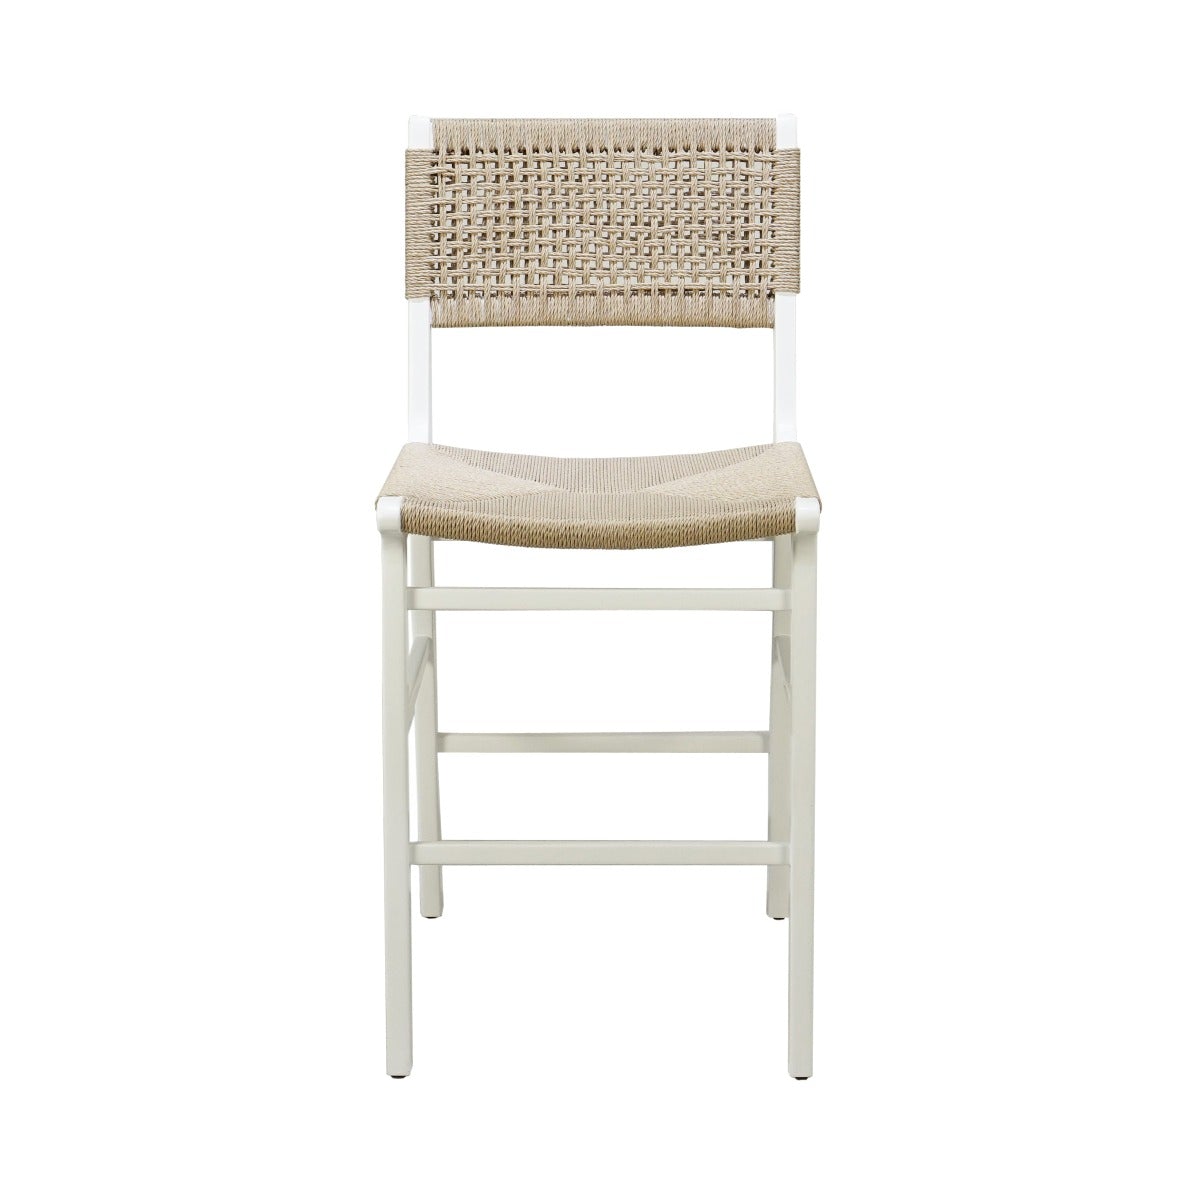 Munro Counter Stool Matte White Lacquer. Front view.